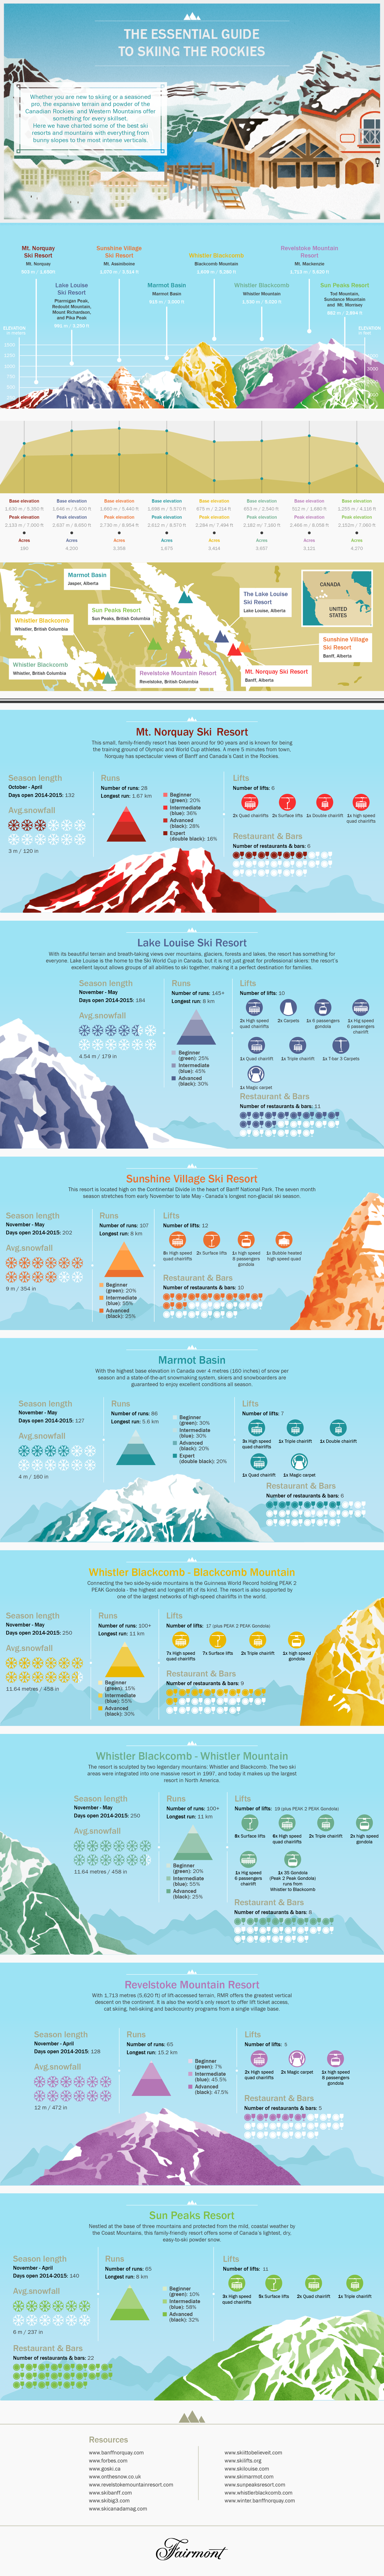 Explore some of the best ski resorts in the Rockies with this useful infographic.